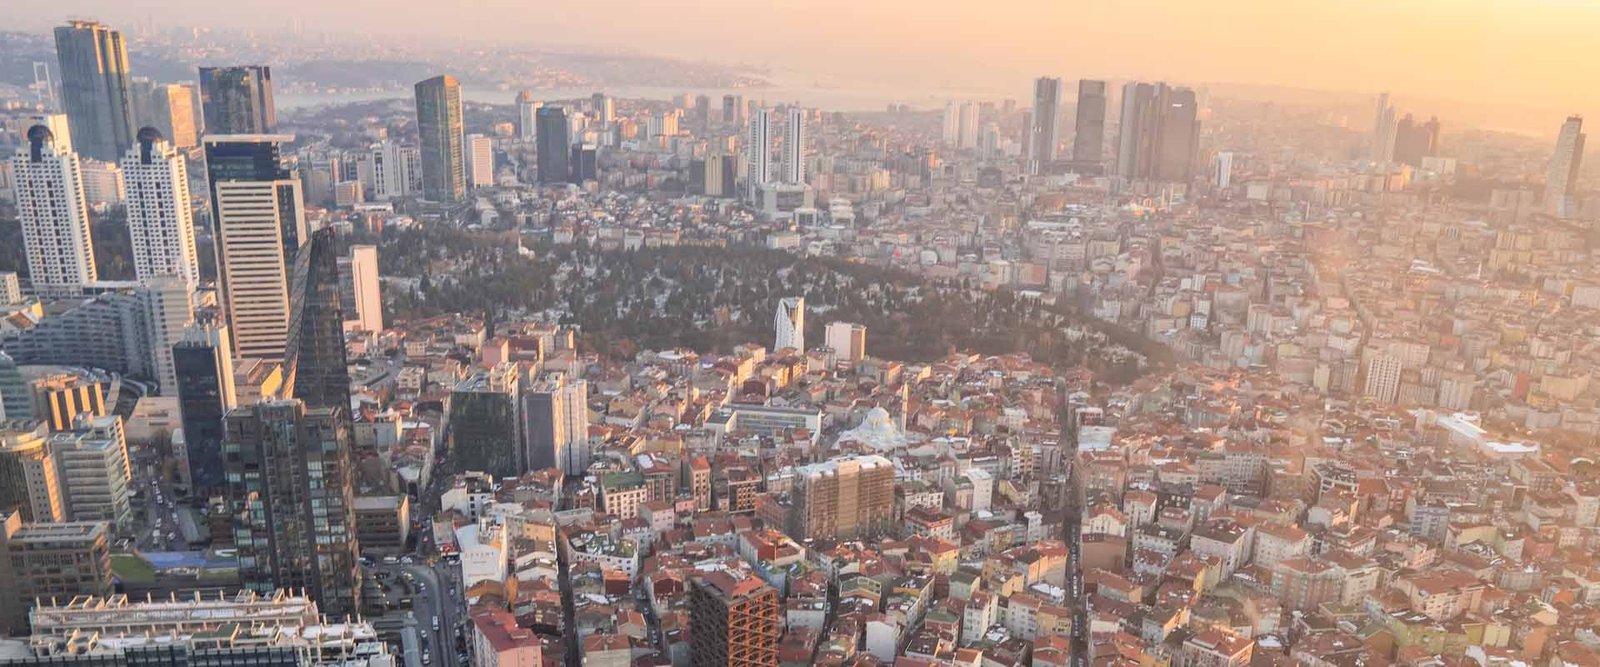 The Square Meter Price Of Office Rentals In Istanbul Has Exceeded 20 Dollars